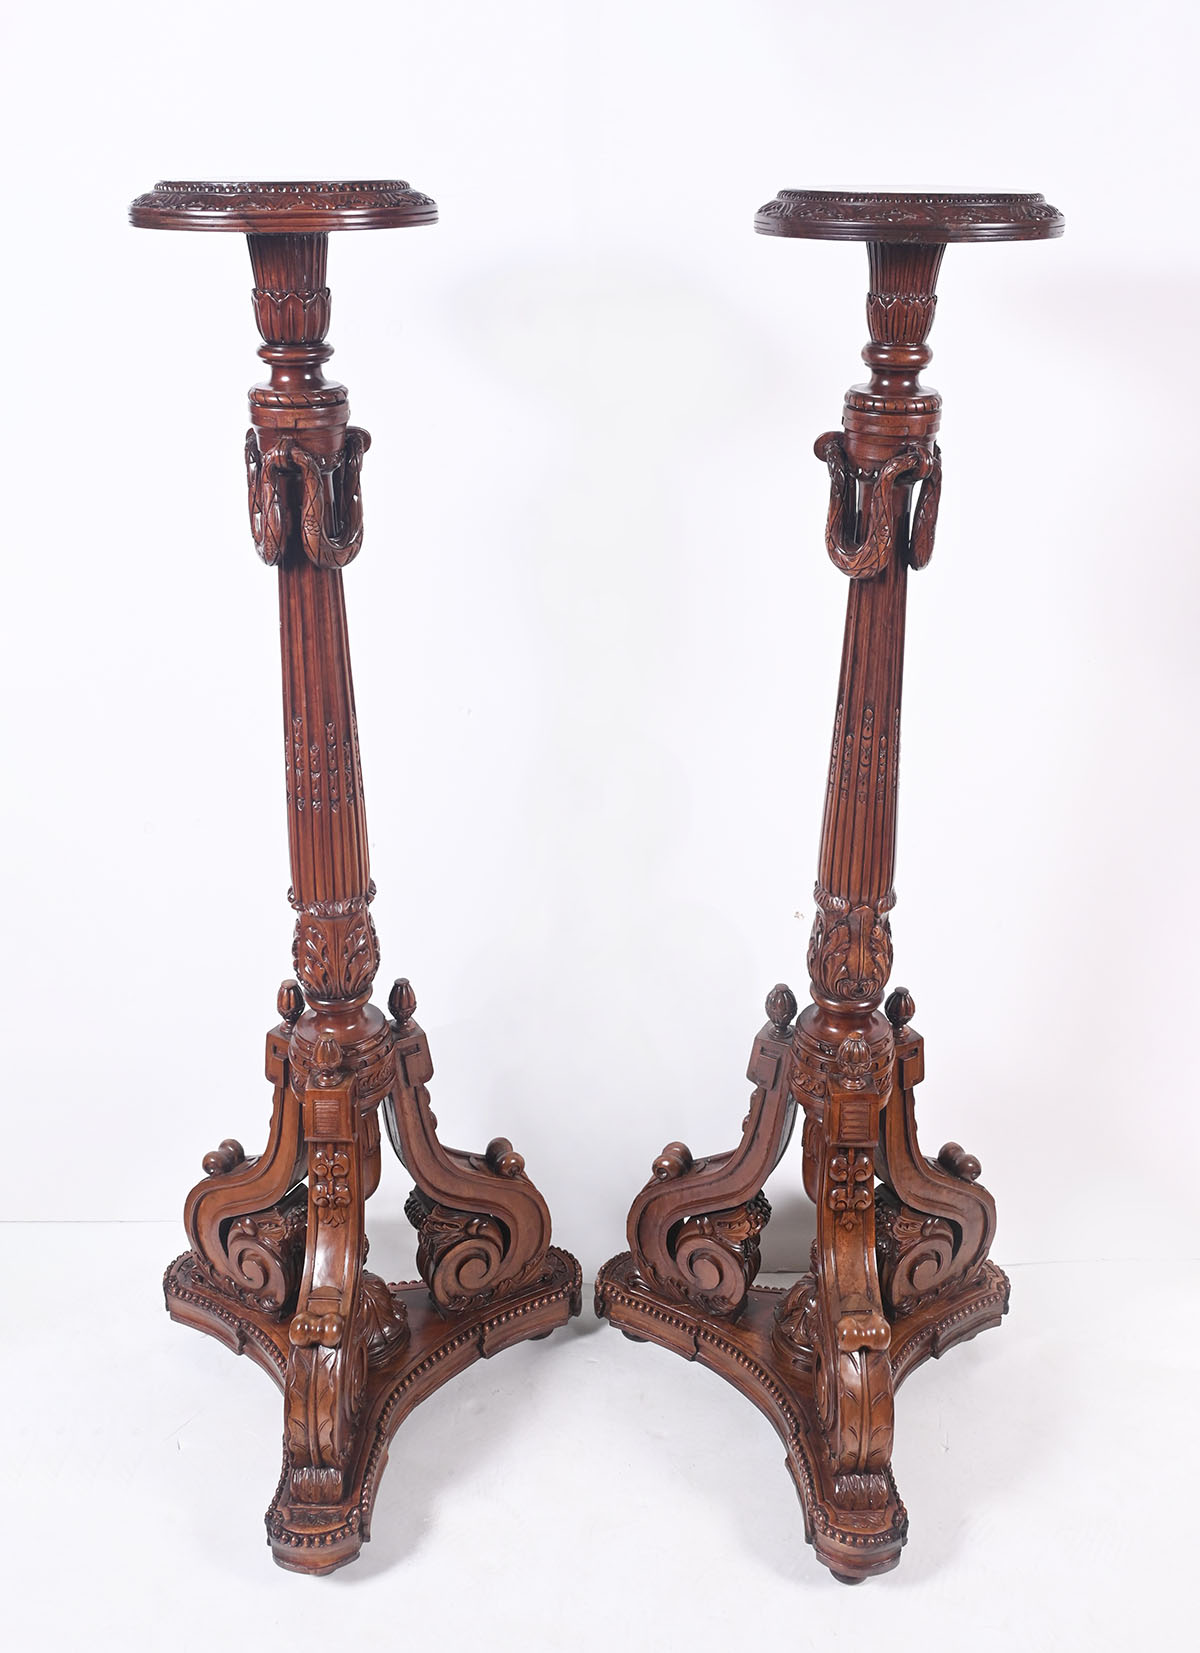 PAIR OF CARVED WOODEN FERN STANDS: